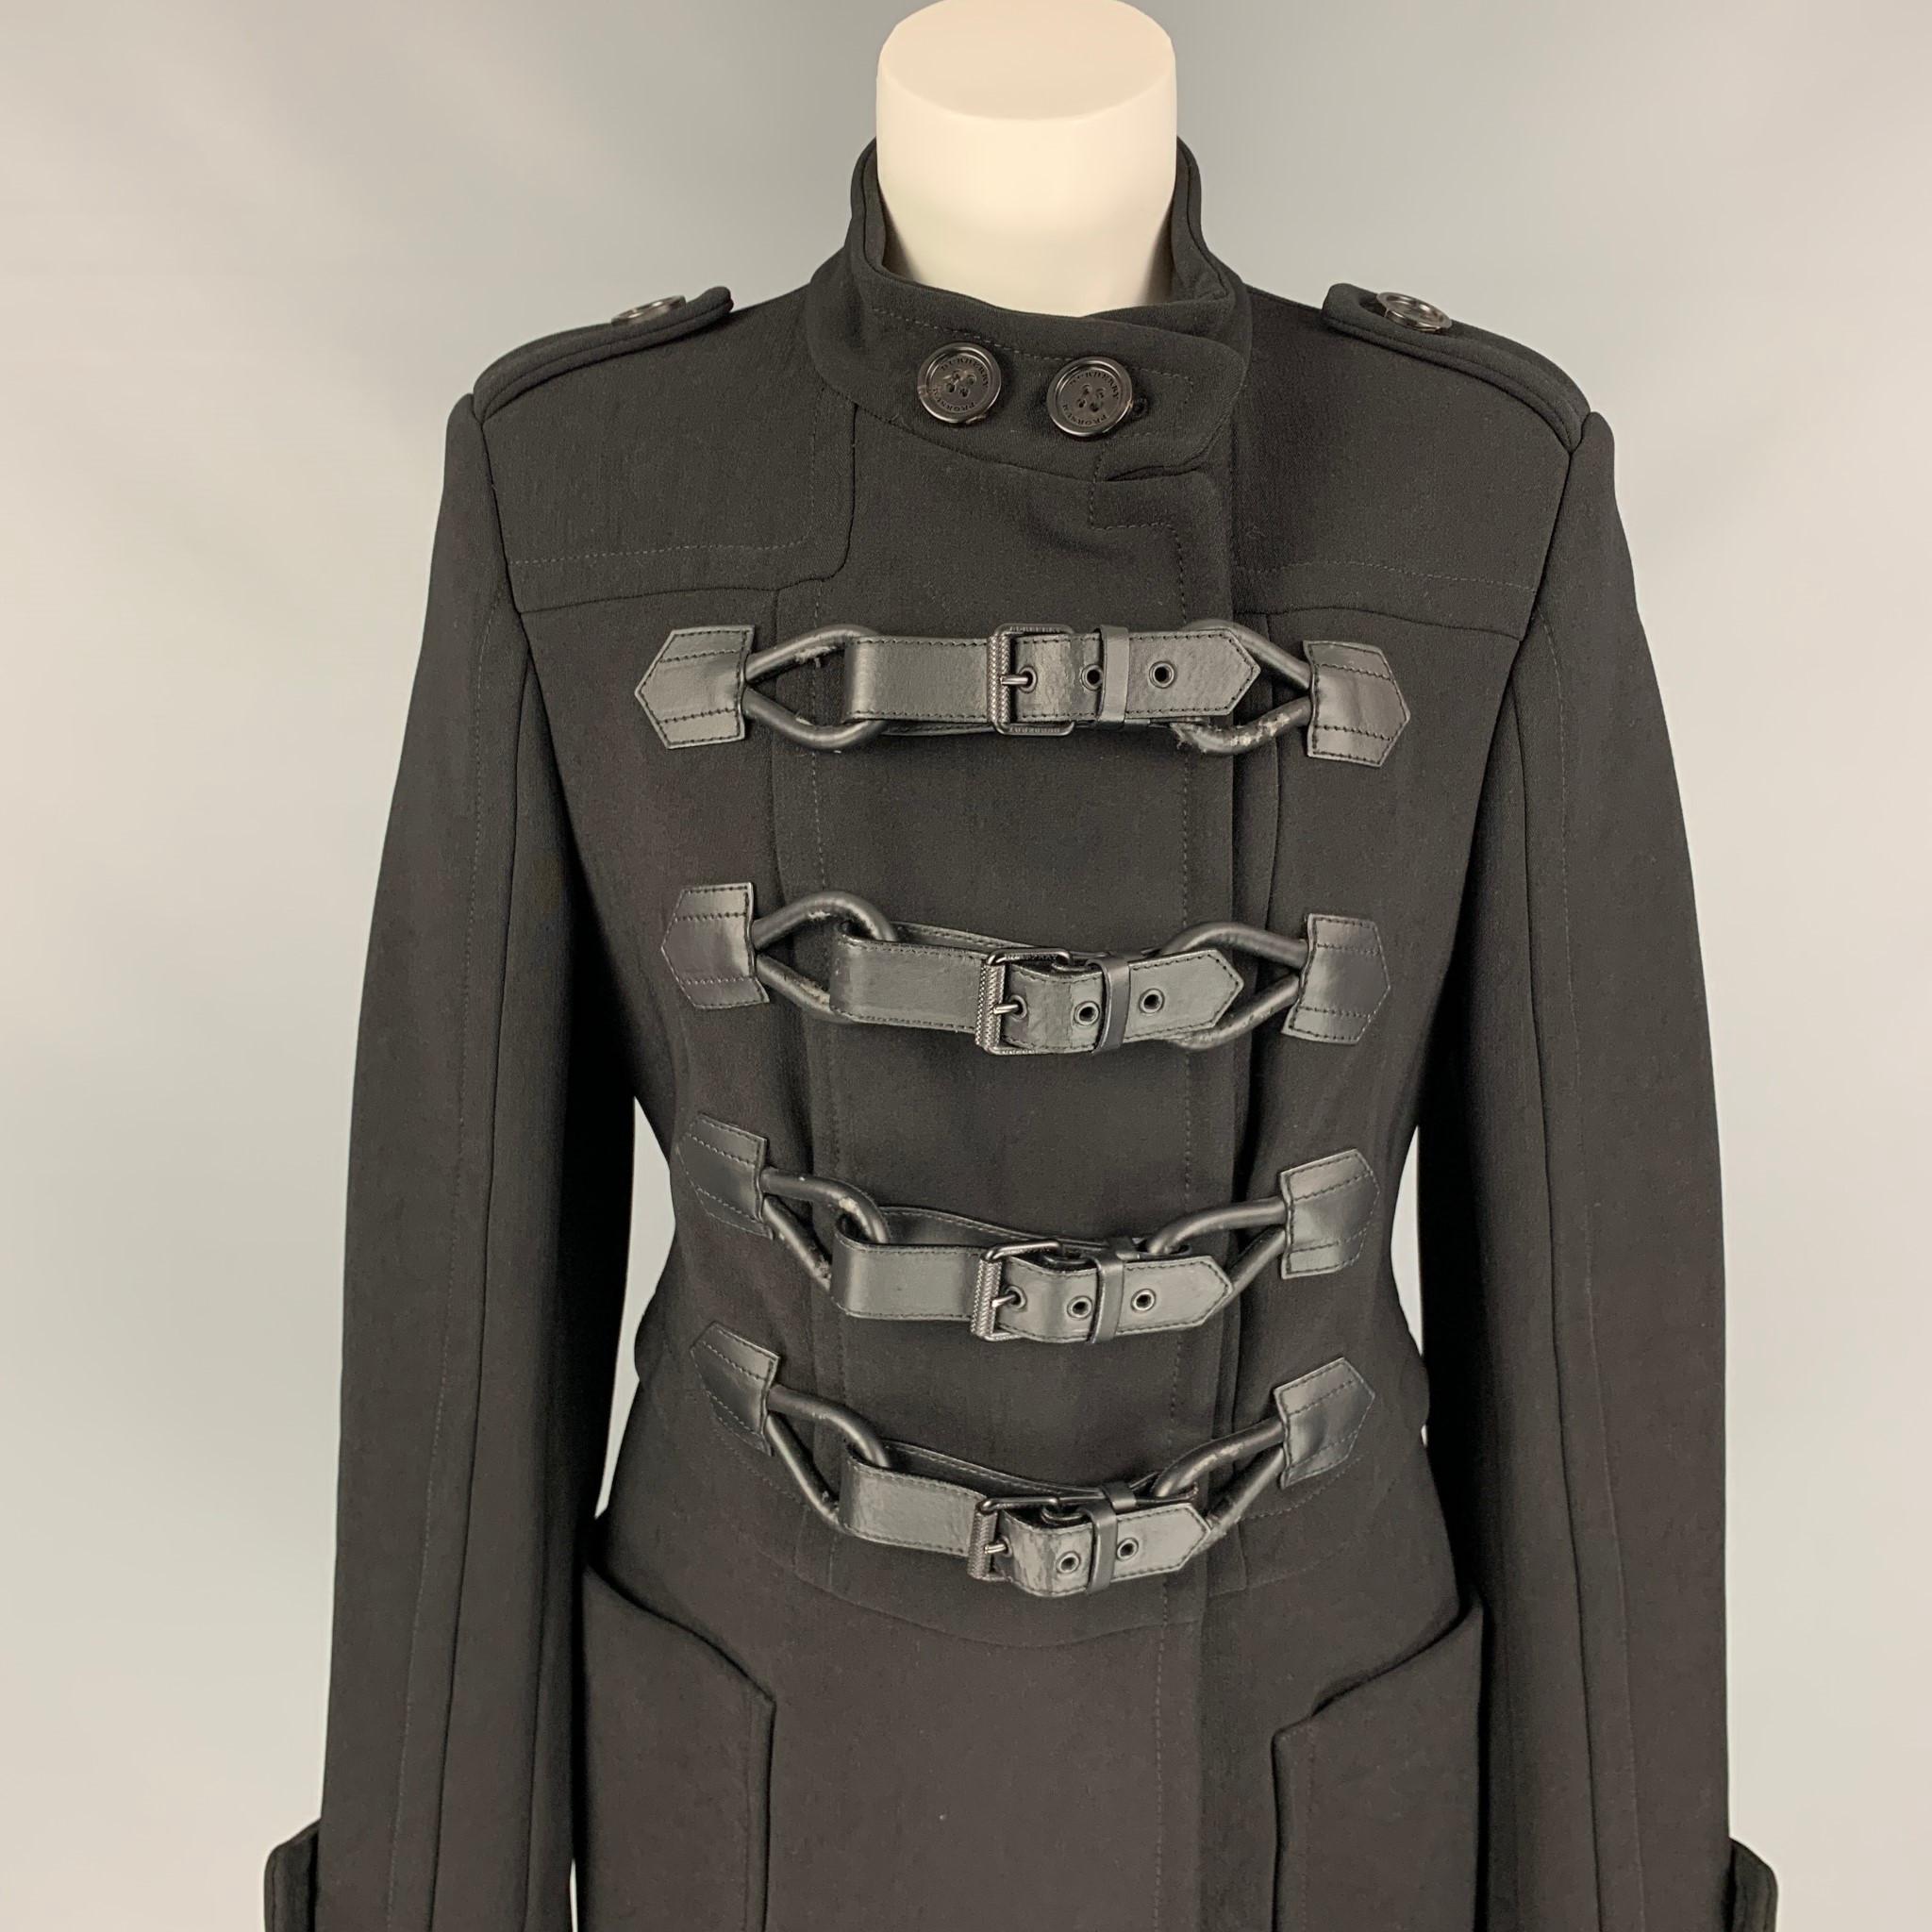 BURBERRY PRORSUM coat comes in a black nylon / cotton with a full liner featuring a military style, back strap detail, epaulettes, patch pockets, and a duffle closure. Made in Italy. 

Very Good Pre-Owned Condition. Light wear at closure.
Marked: